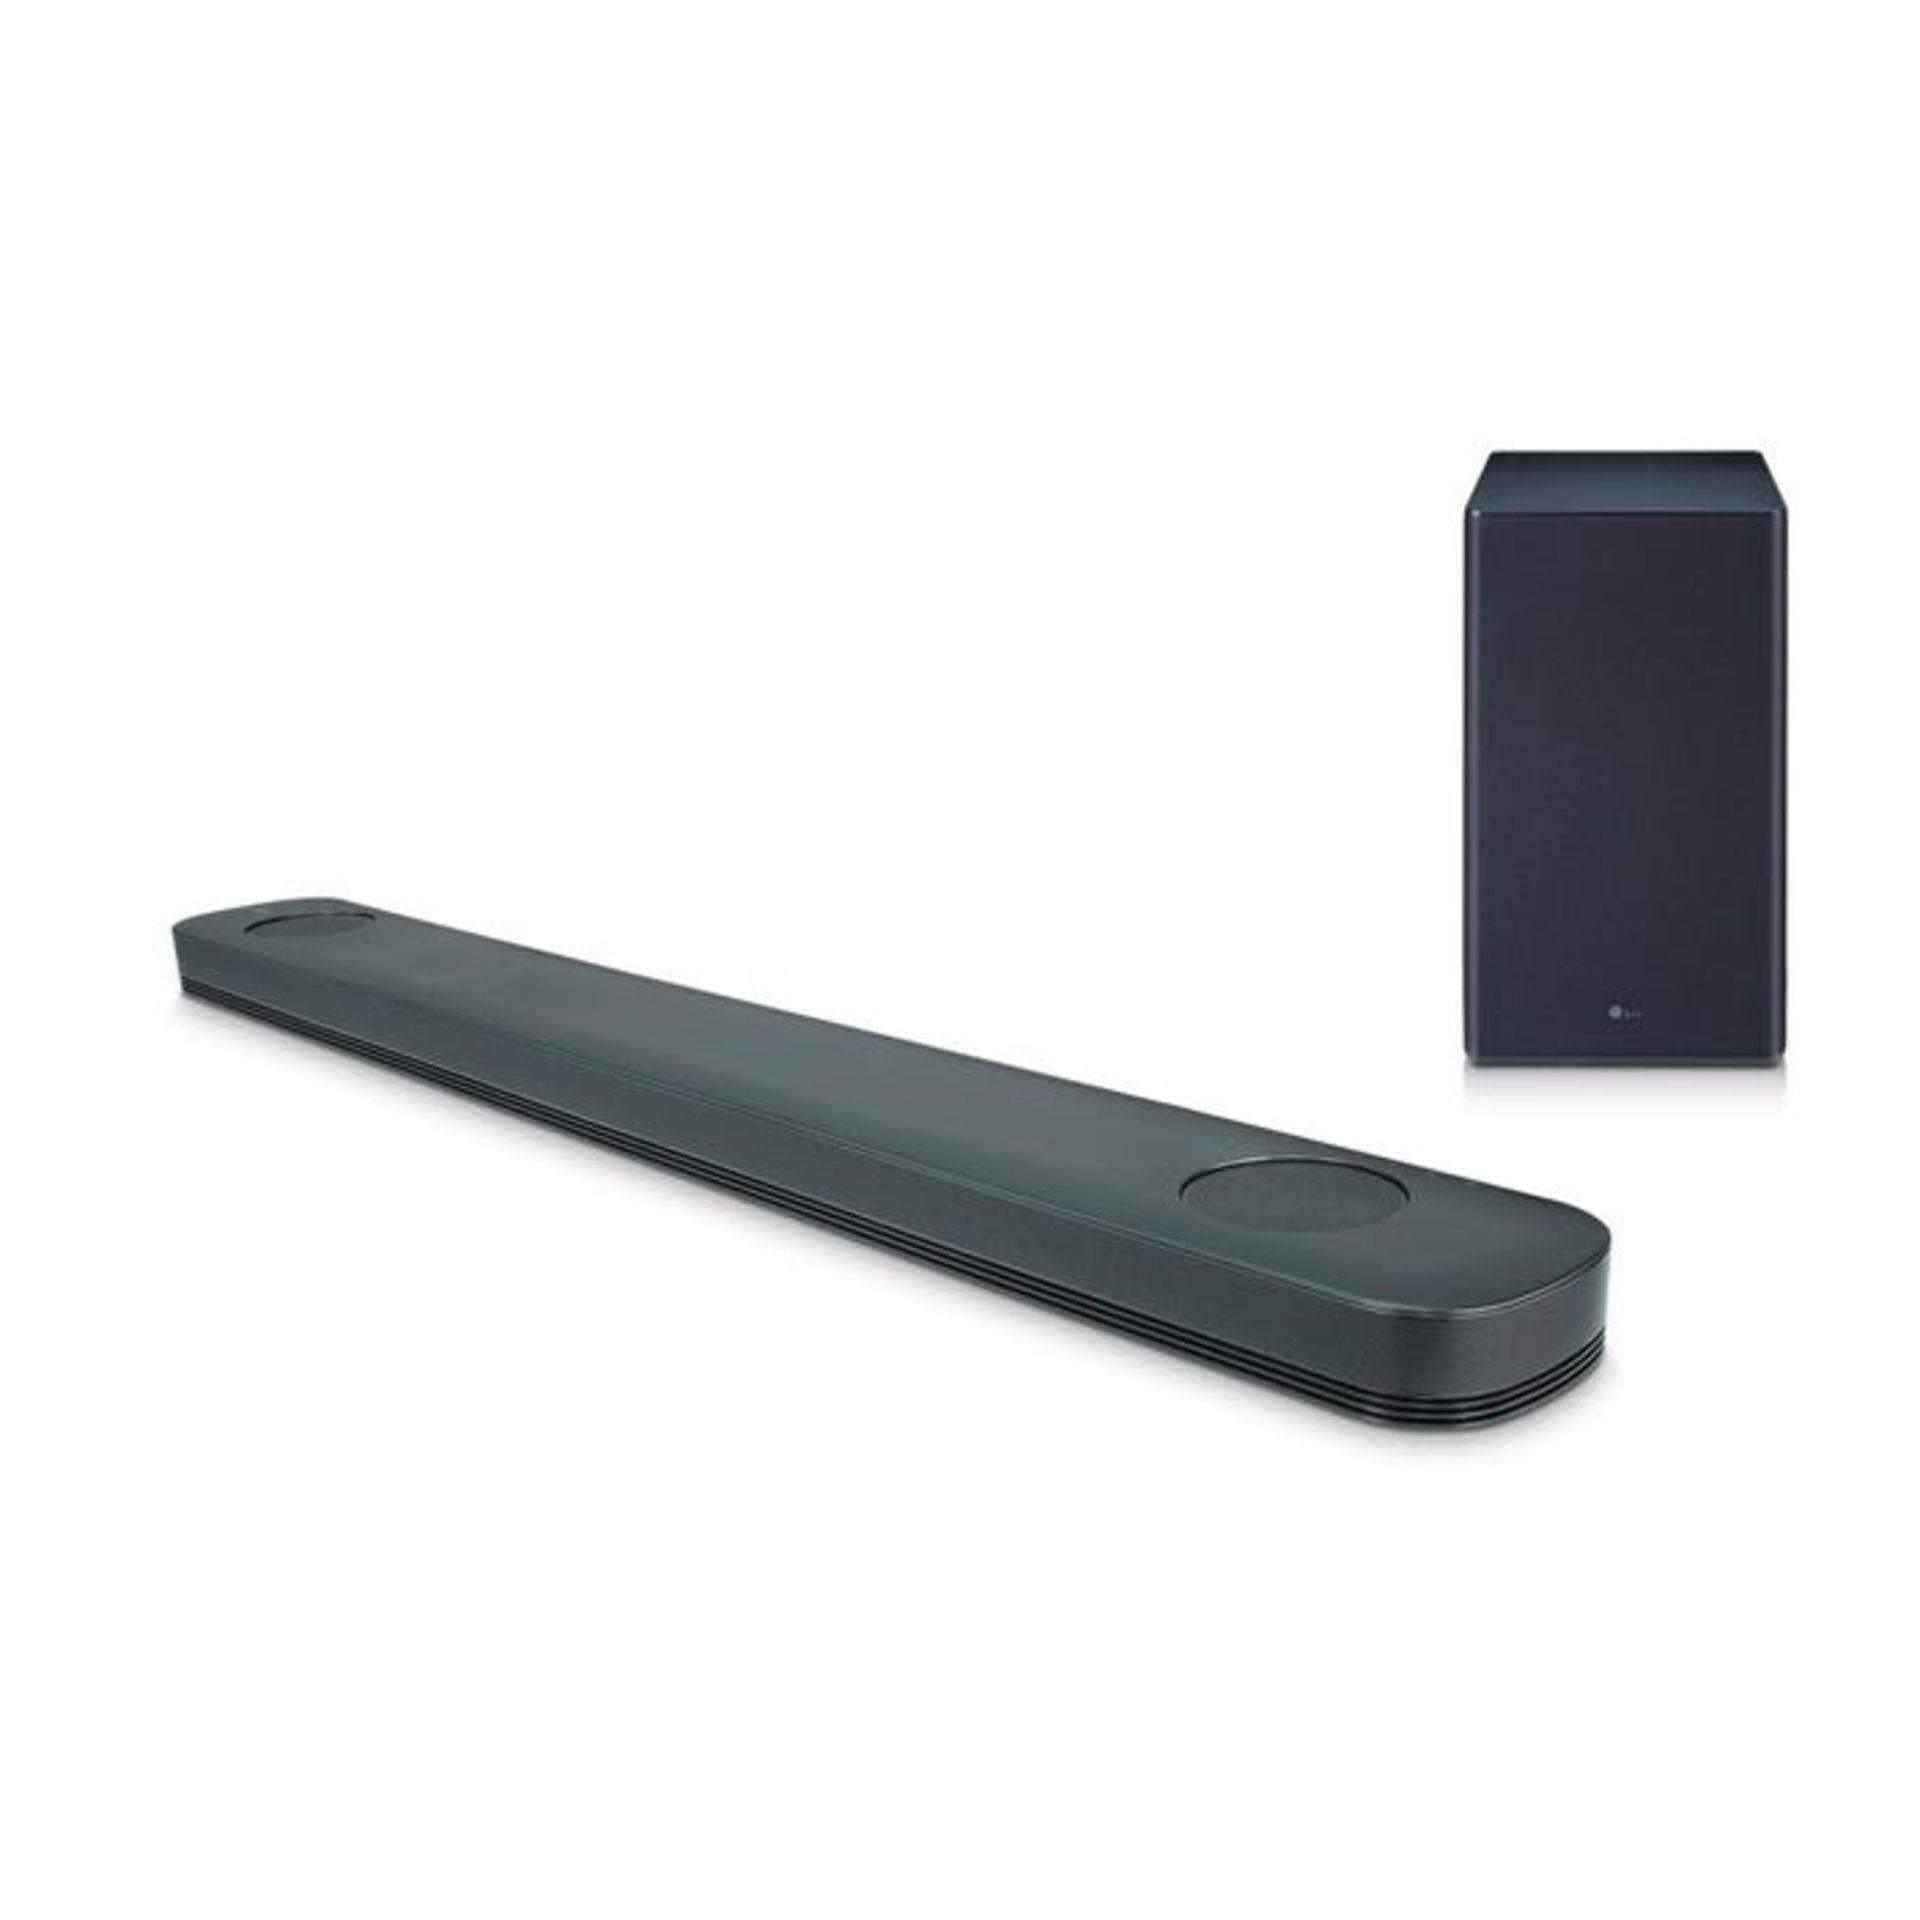 1 BOXED LG SK9Y 5.1.2CH WIRELESS HIGH RES SOUND BAR & SUBWOOFER WITH DOLBY ATMOS RRP £649.99